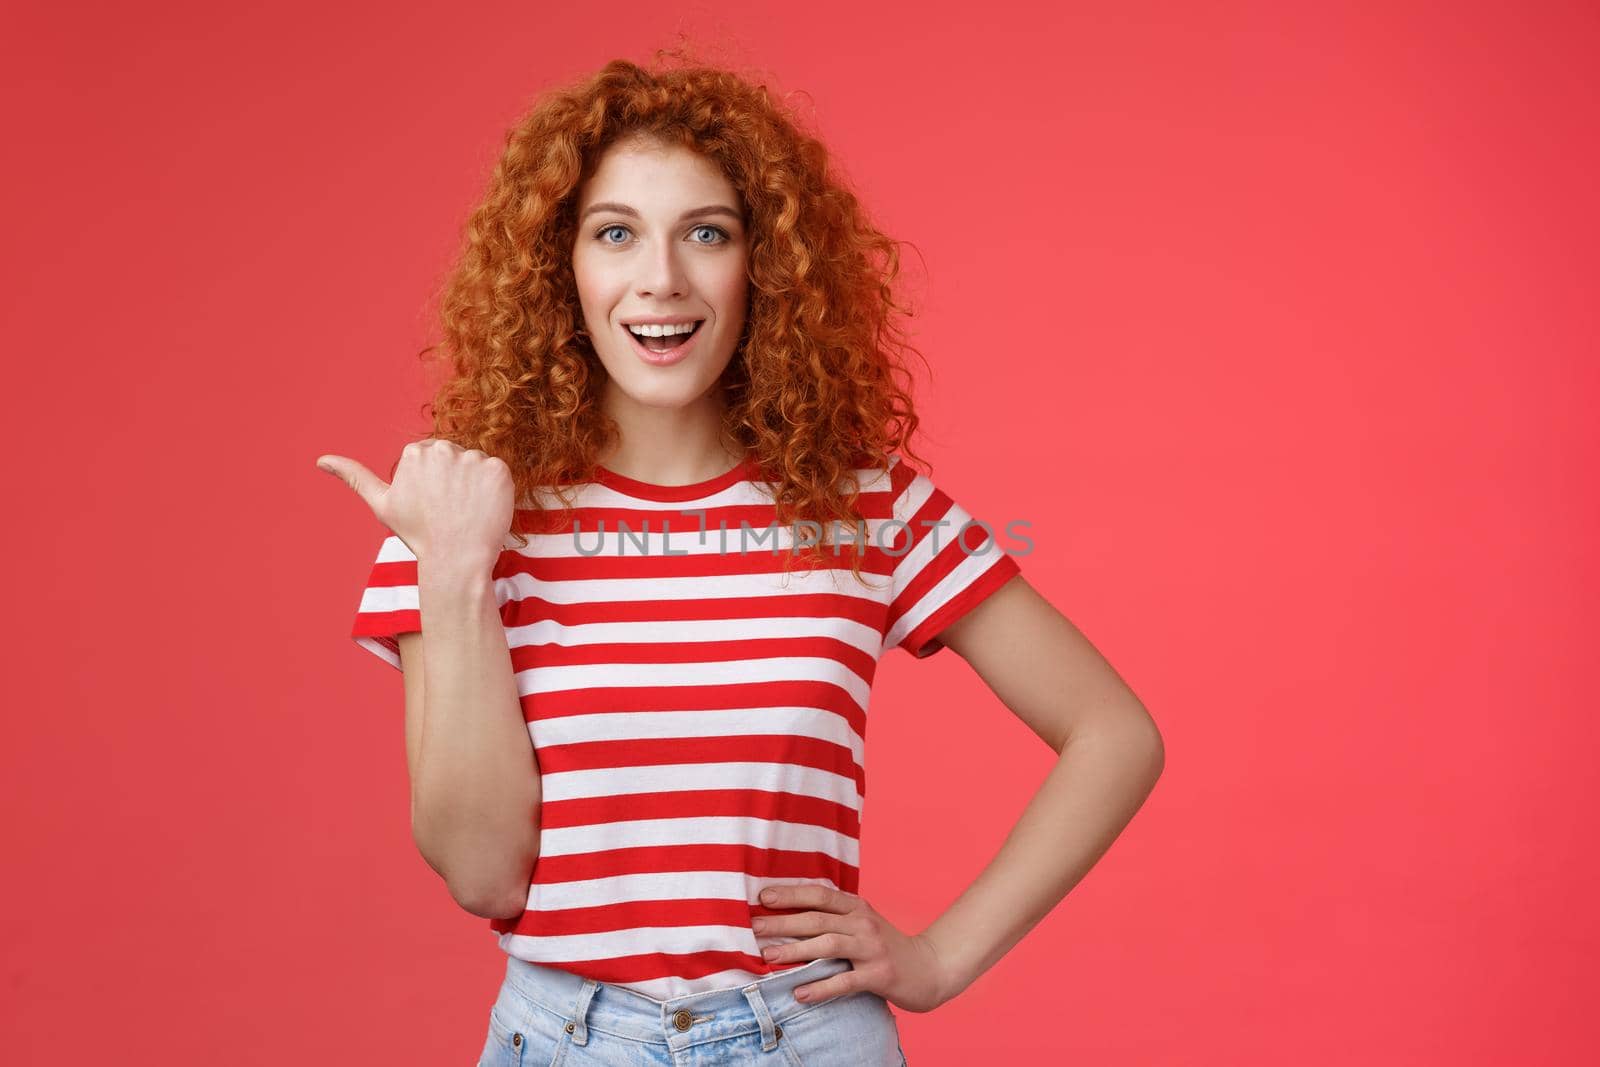 Sassy good-looking emotive happy smiling redhead european female curly hairstyle pointing thumb left grin assertive cheeky hold hand waist directing promo advertising offer red background.